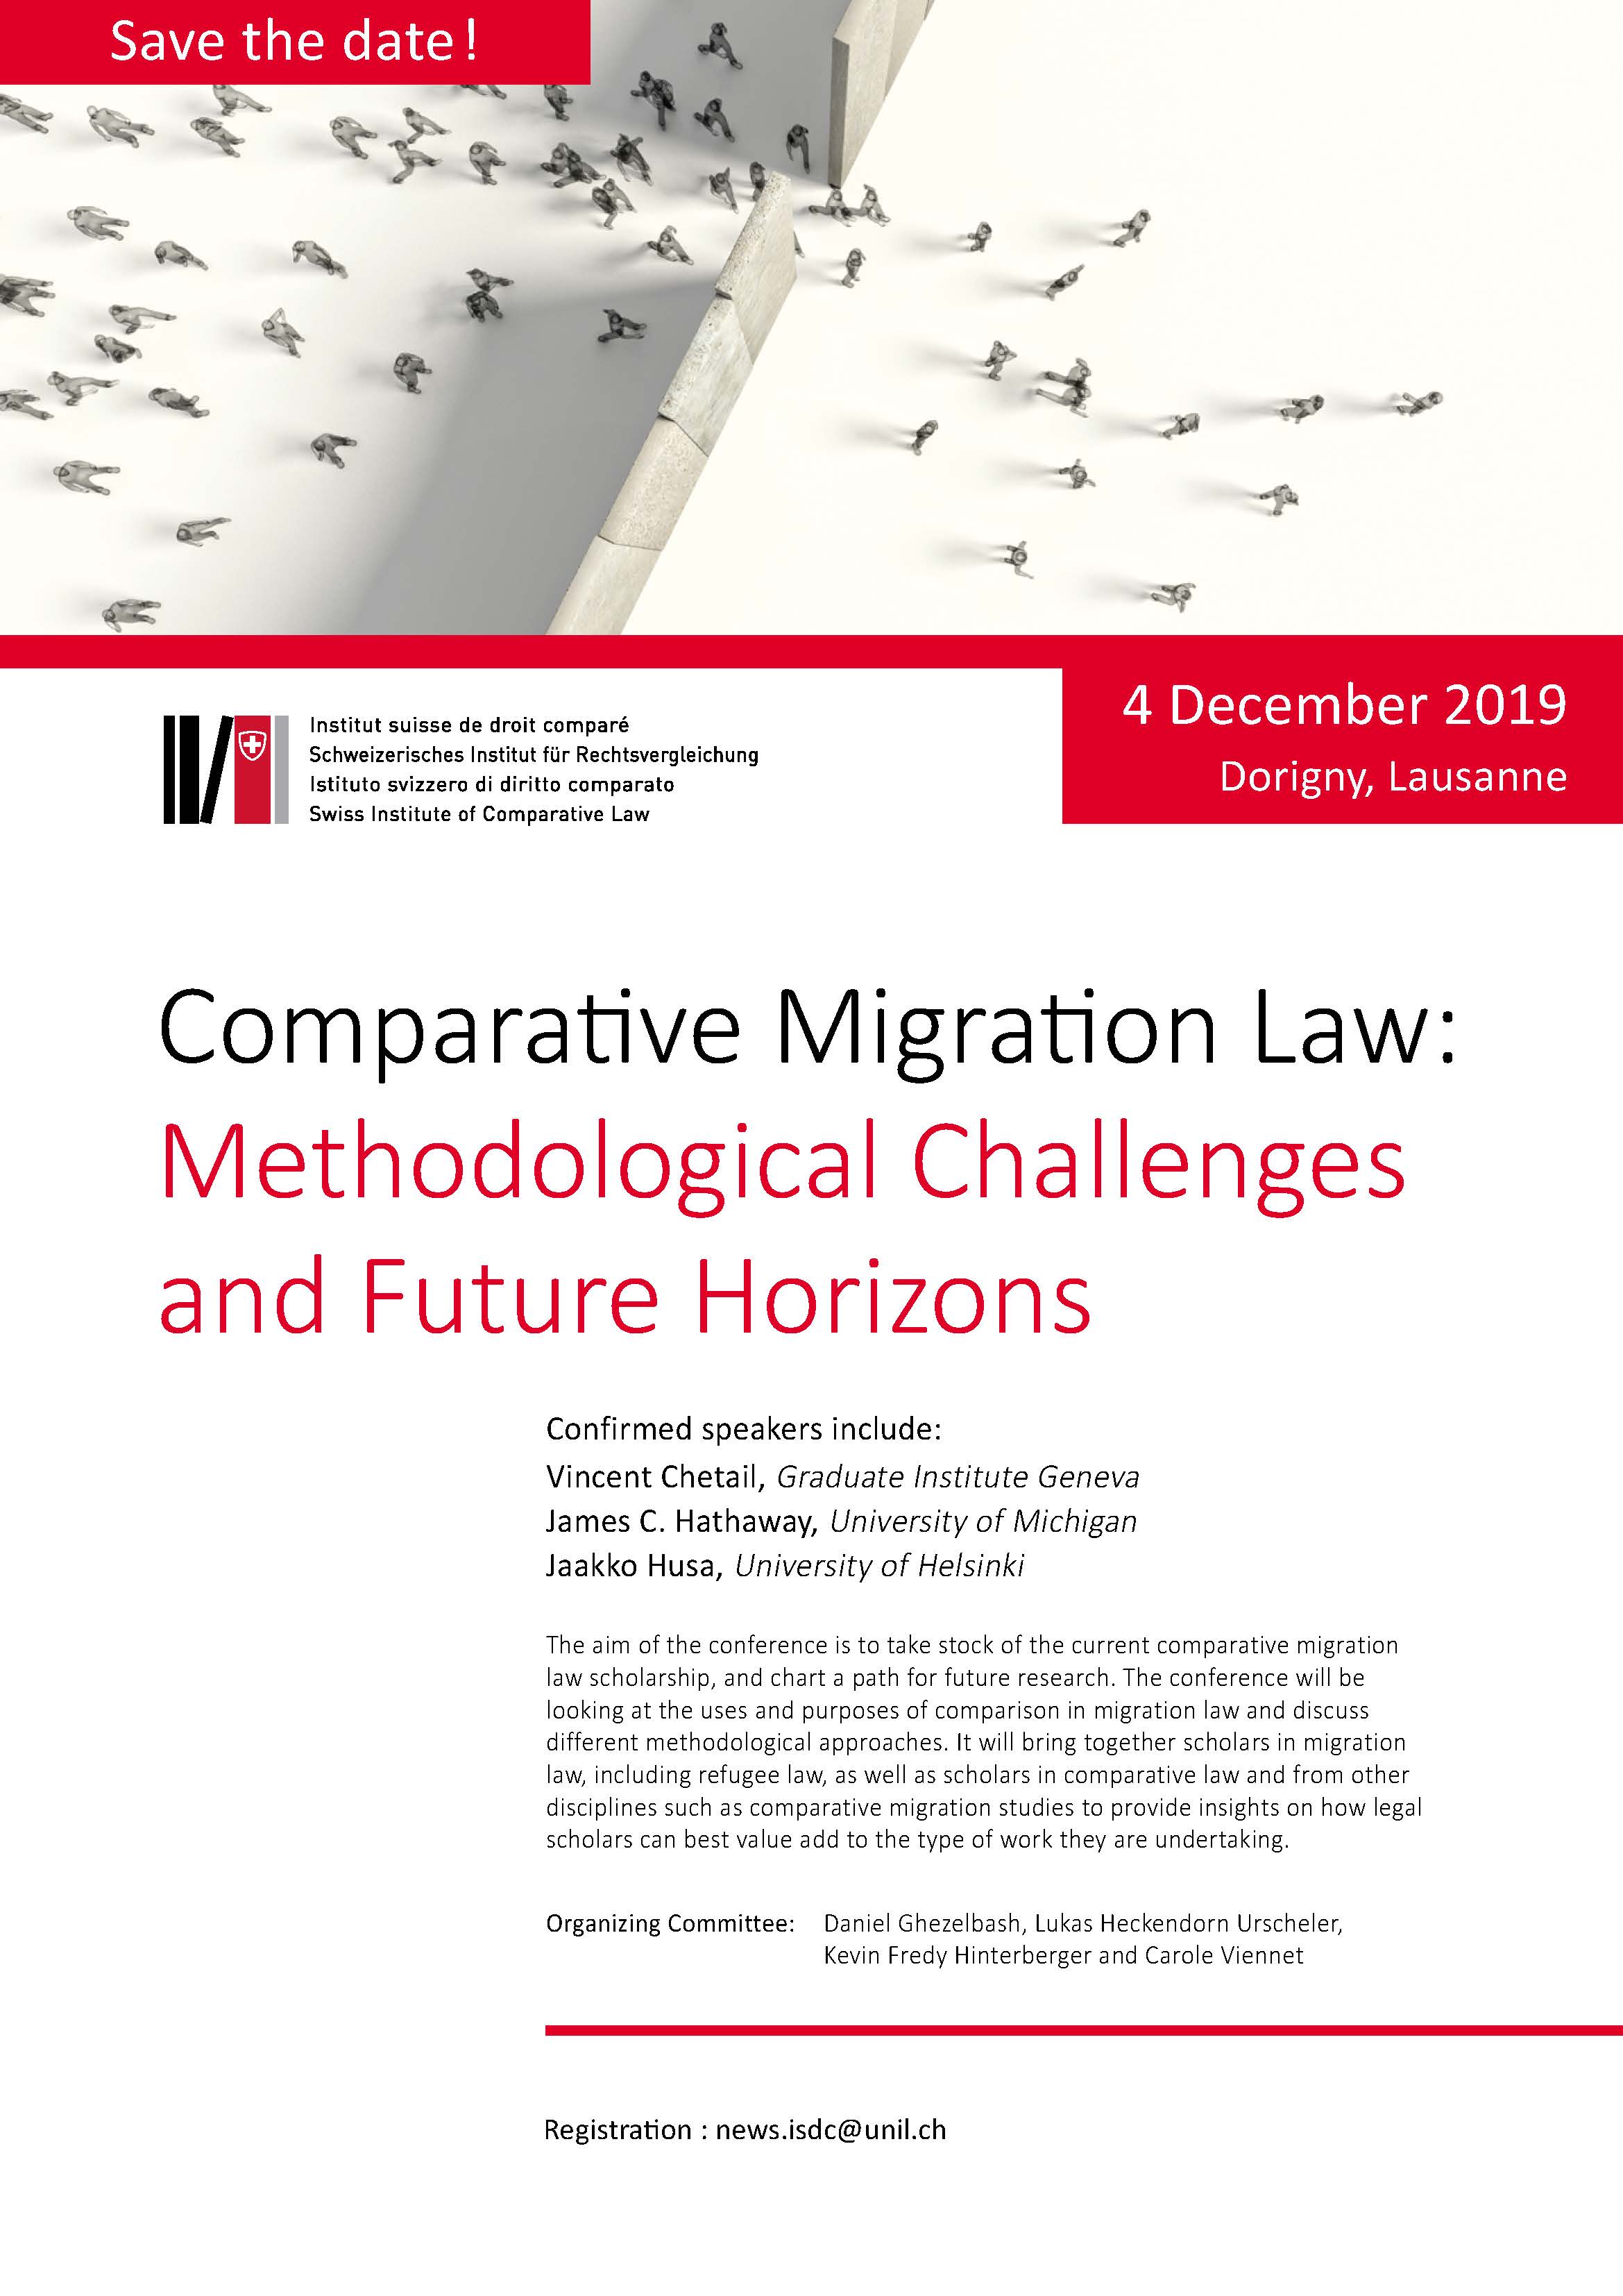 Comparative Migration Law: Methodological Challenges and Future Horizons